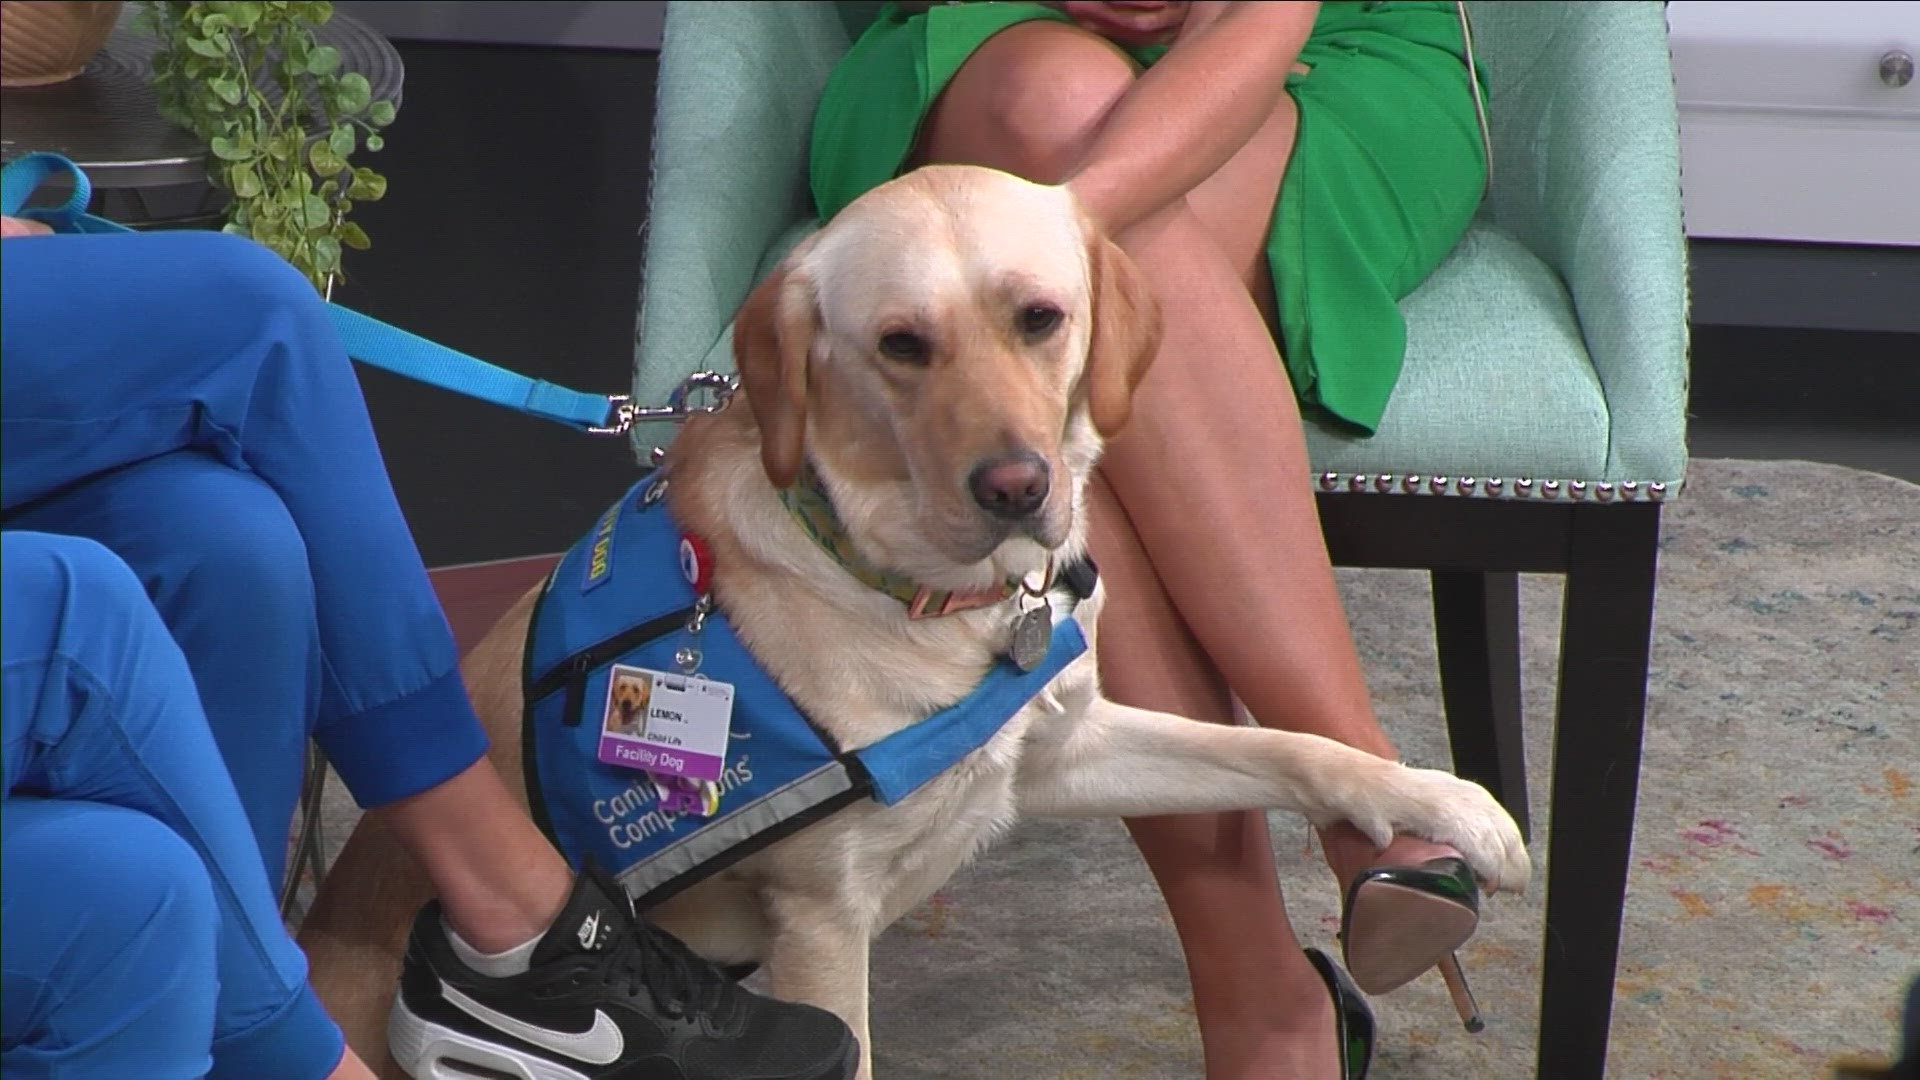 Lemon is the newest facility dog helping pediatric patients at Rocky Mountain Hospital for Children thanks to the Rocky Mountain Children's Health Foundation.